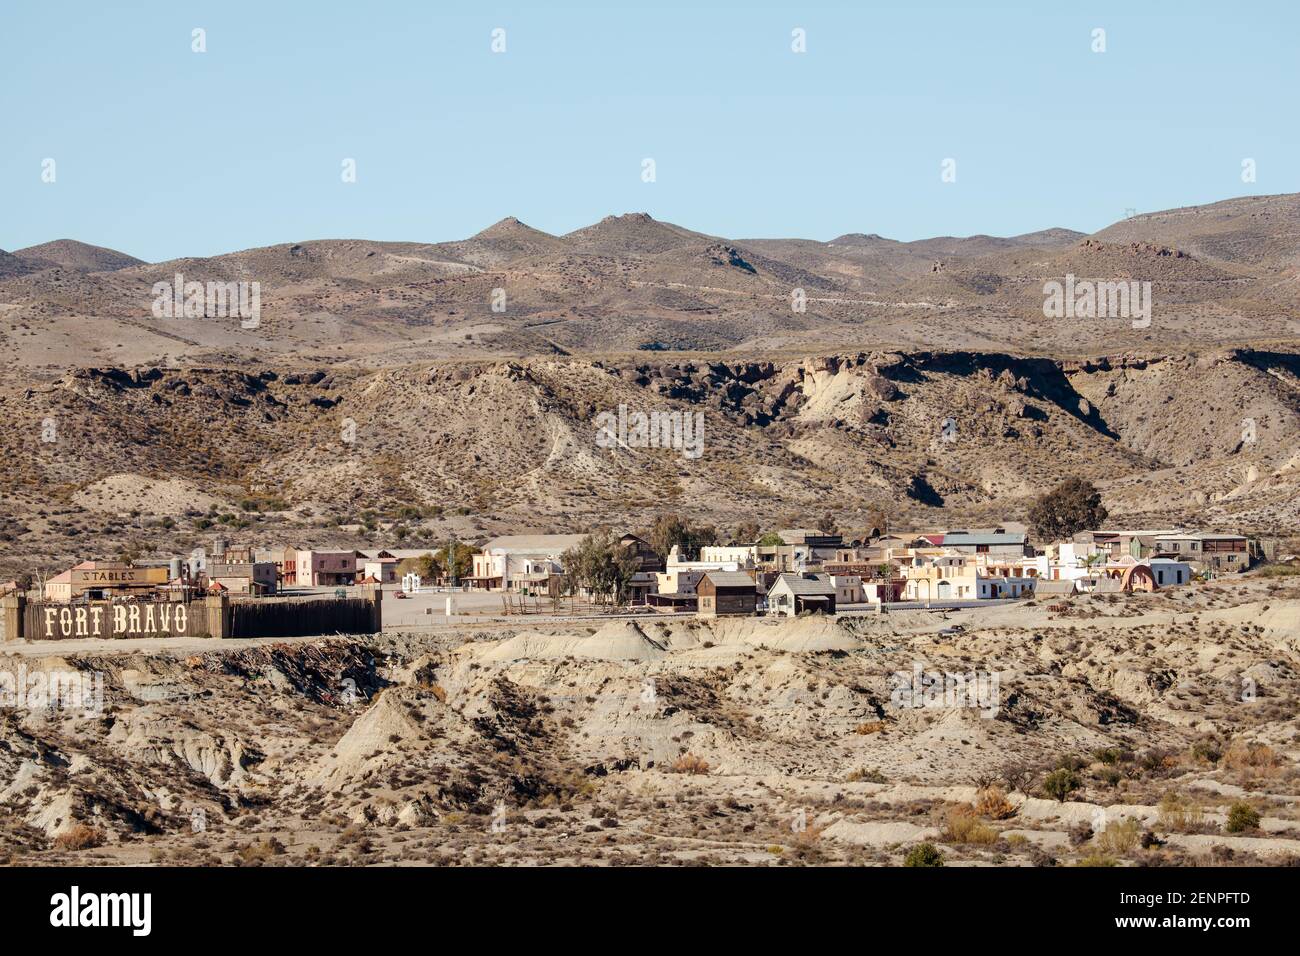 Tabernas Desert Post Office Movie Location Spaghetti Western Andalusia  Spain Stock Photo - Download Image Now - iStock